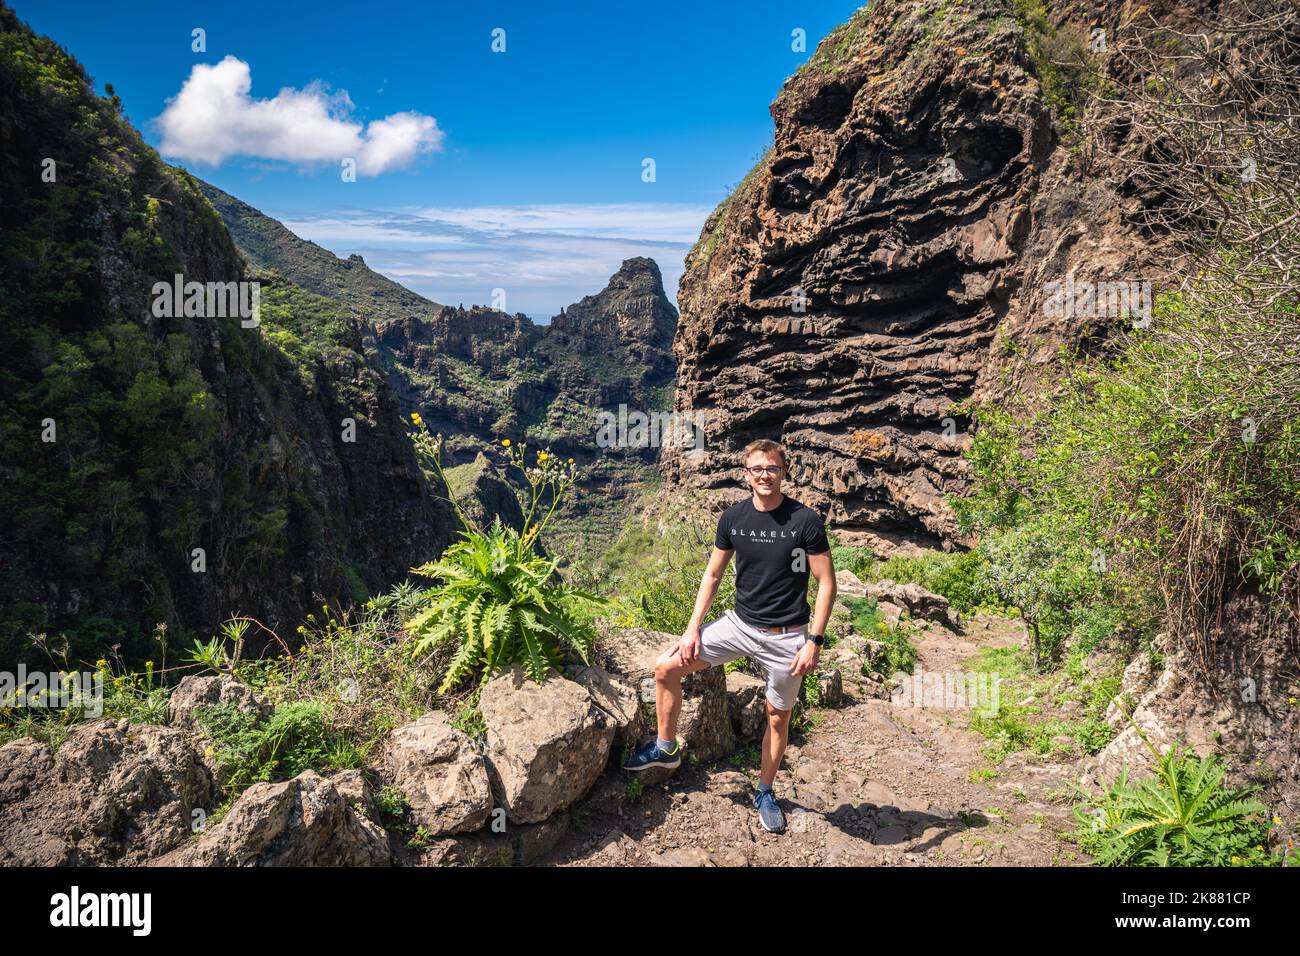 A Caucasian male hiker on top of a mountain during sunset in Masca, Tenerife, Spain Stock Photo